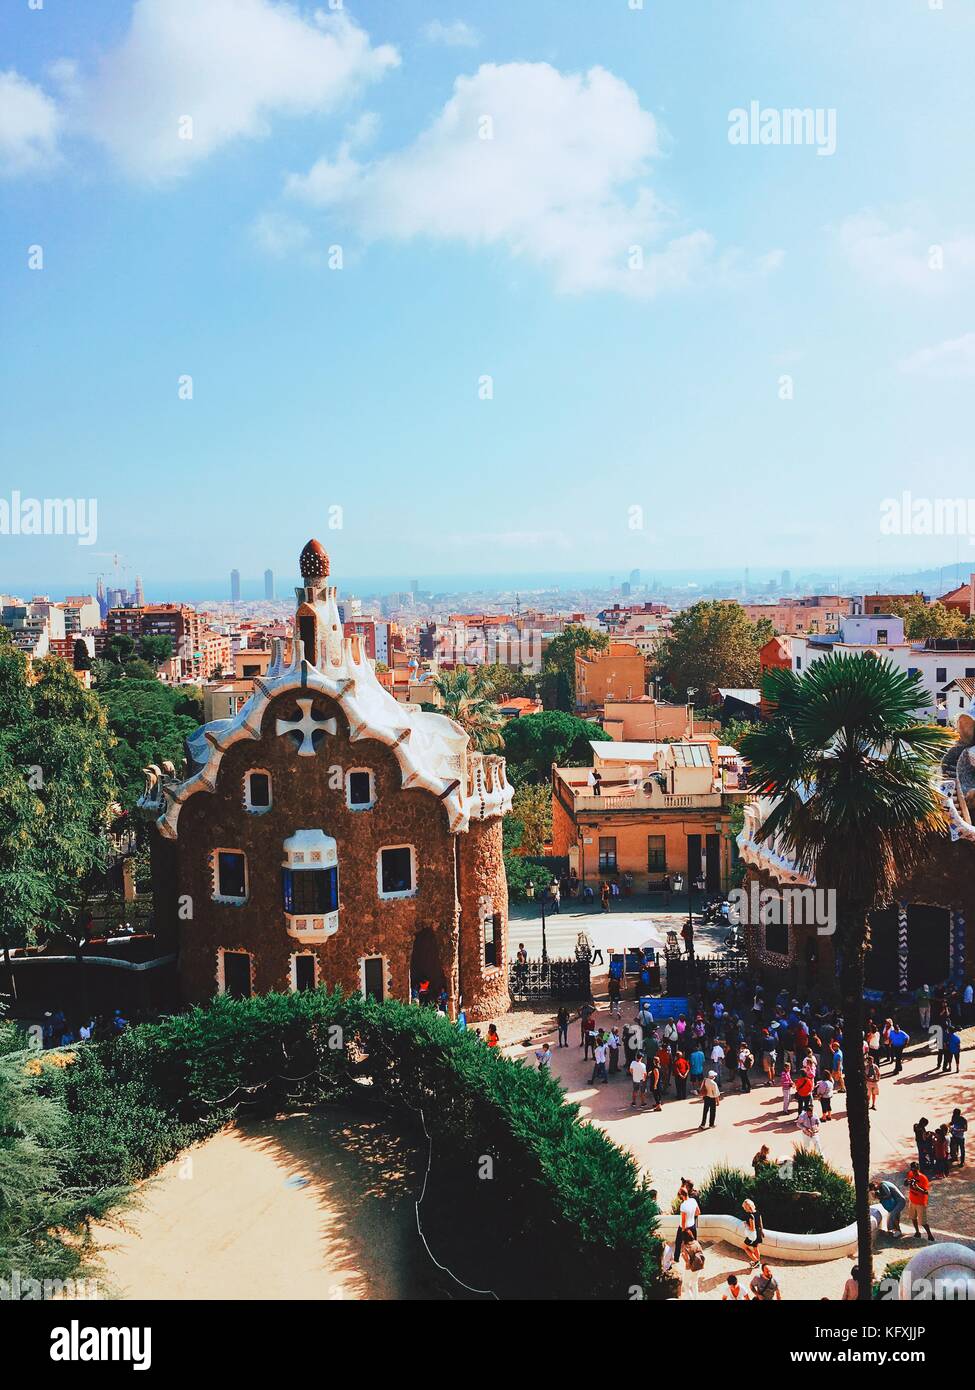 Fragments of the beautiful architecture in Park Guell. Parc Guell designed by Antoni Gaudi, is one of the world's most intriguing parks. Carmel Hill, Barcelona, Spain. Stock Photo